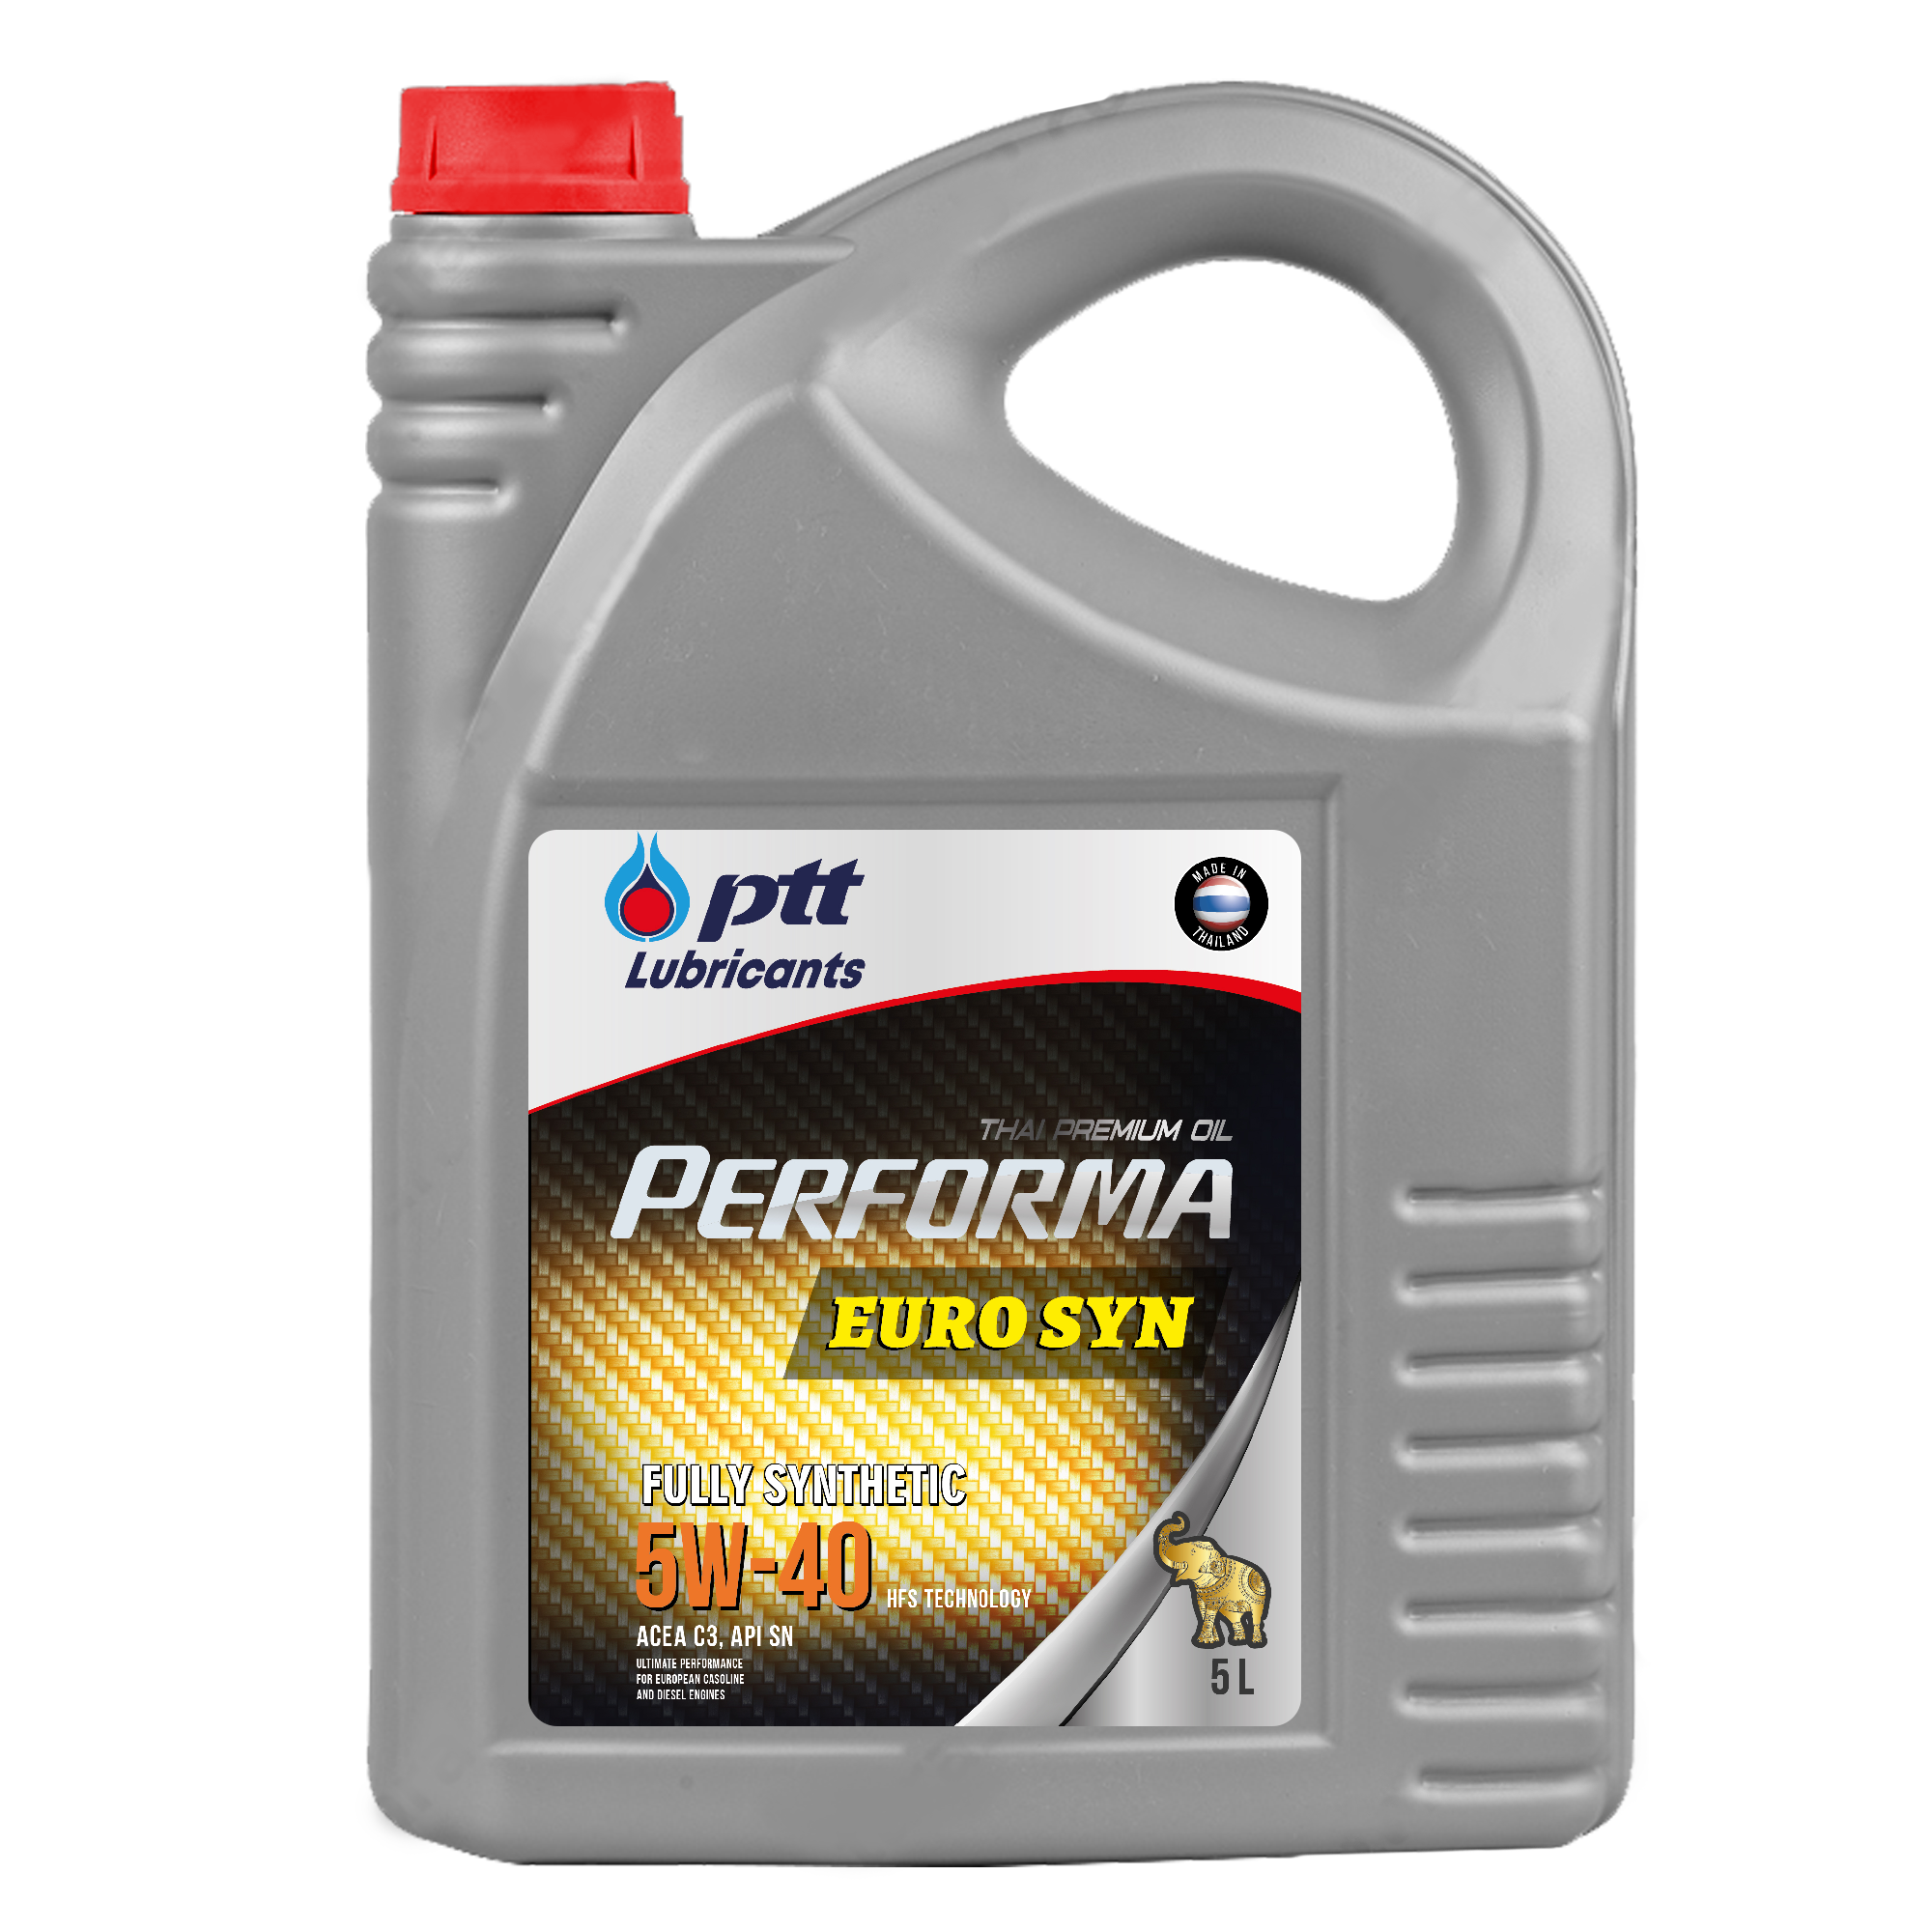 фото Моторное масло performa euro syn ptt lubricants